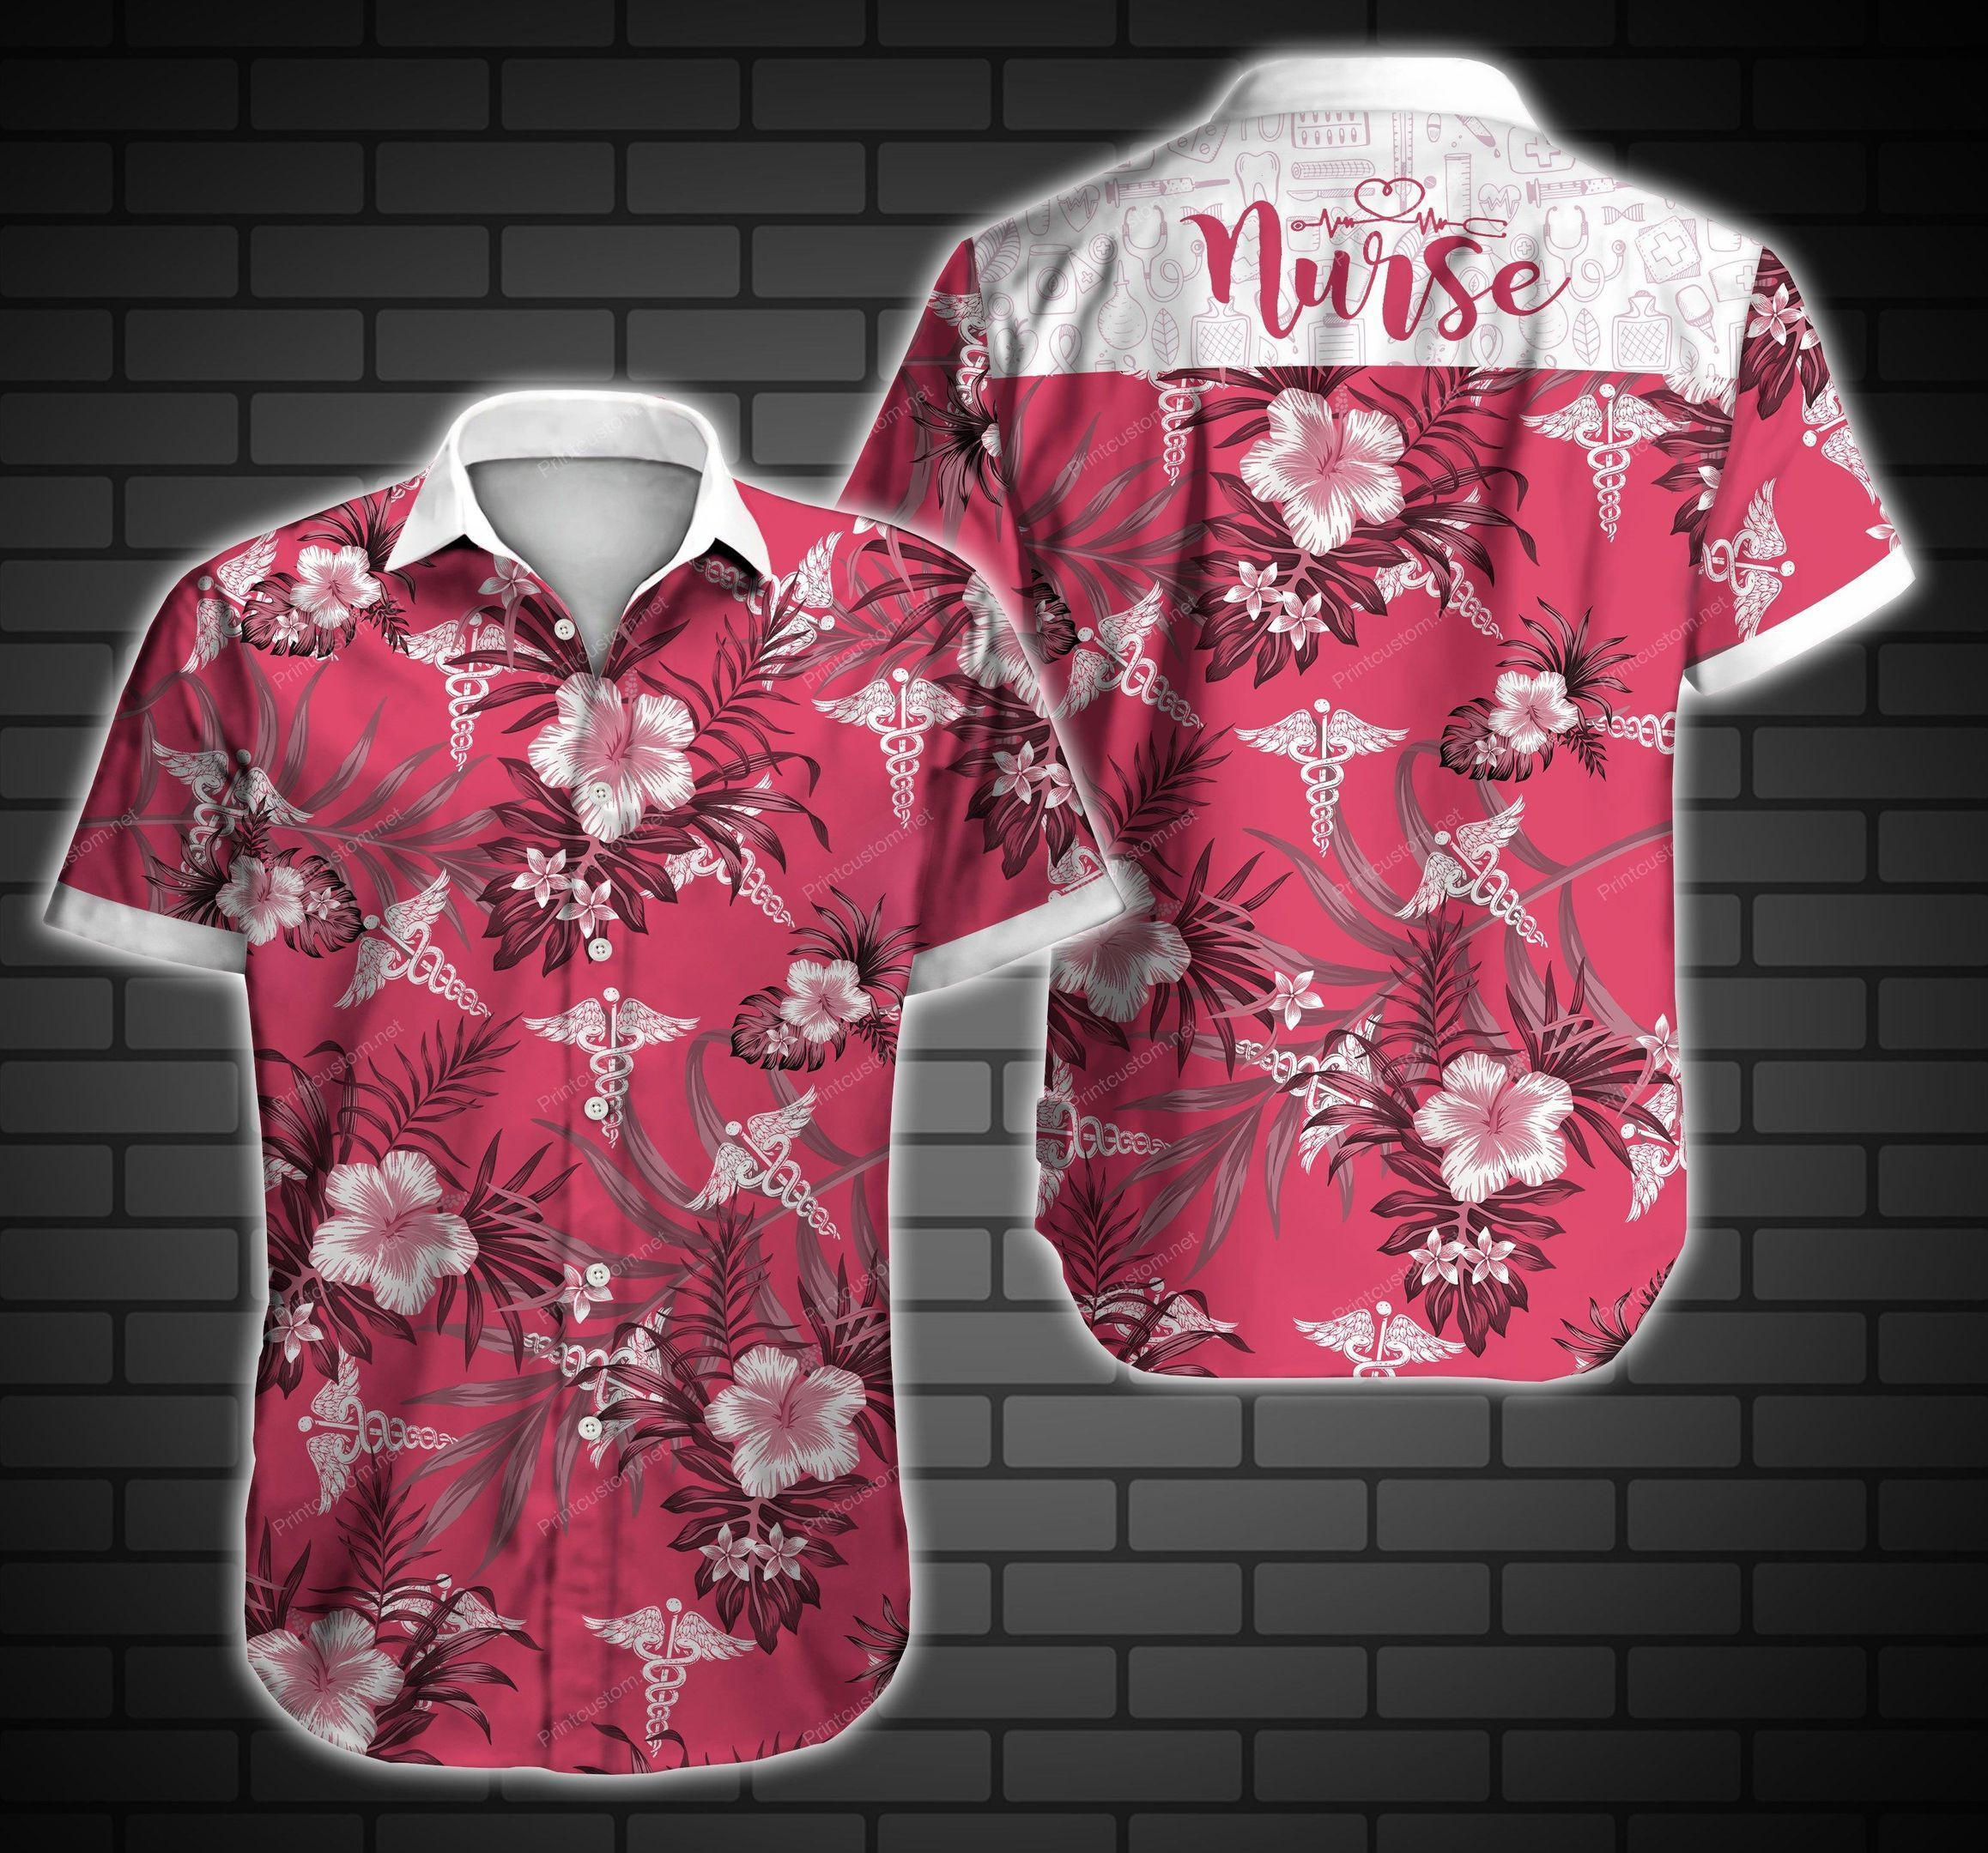 Choose from the many styles and colors to find your favorite Hawaiian Shirt below 59